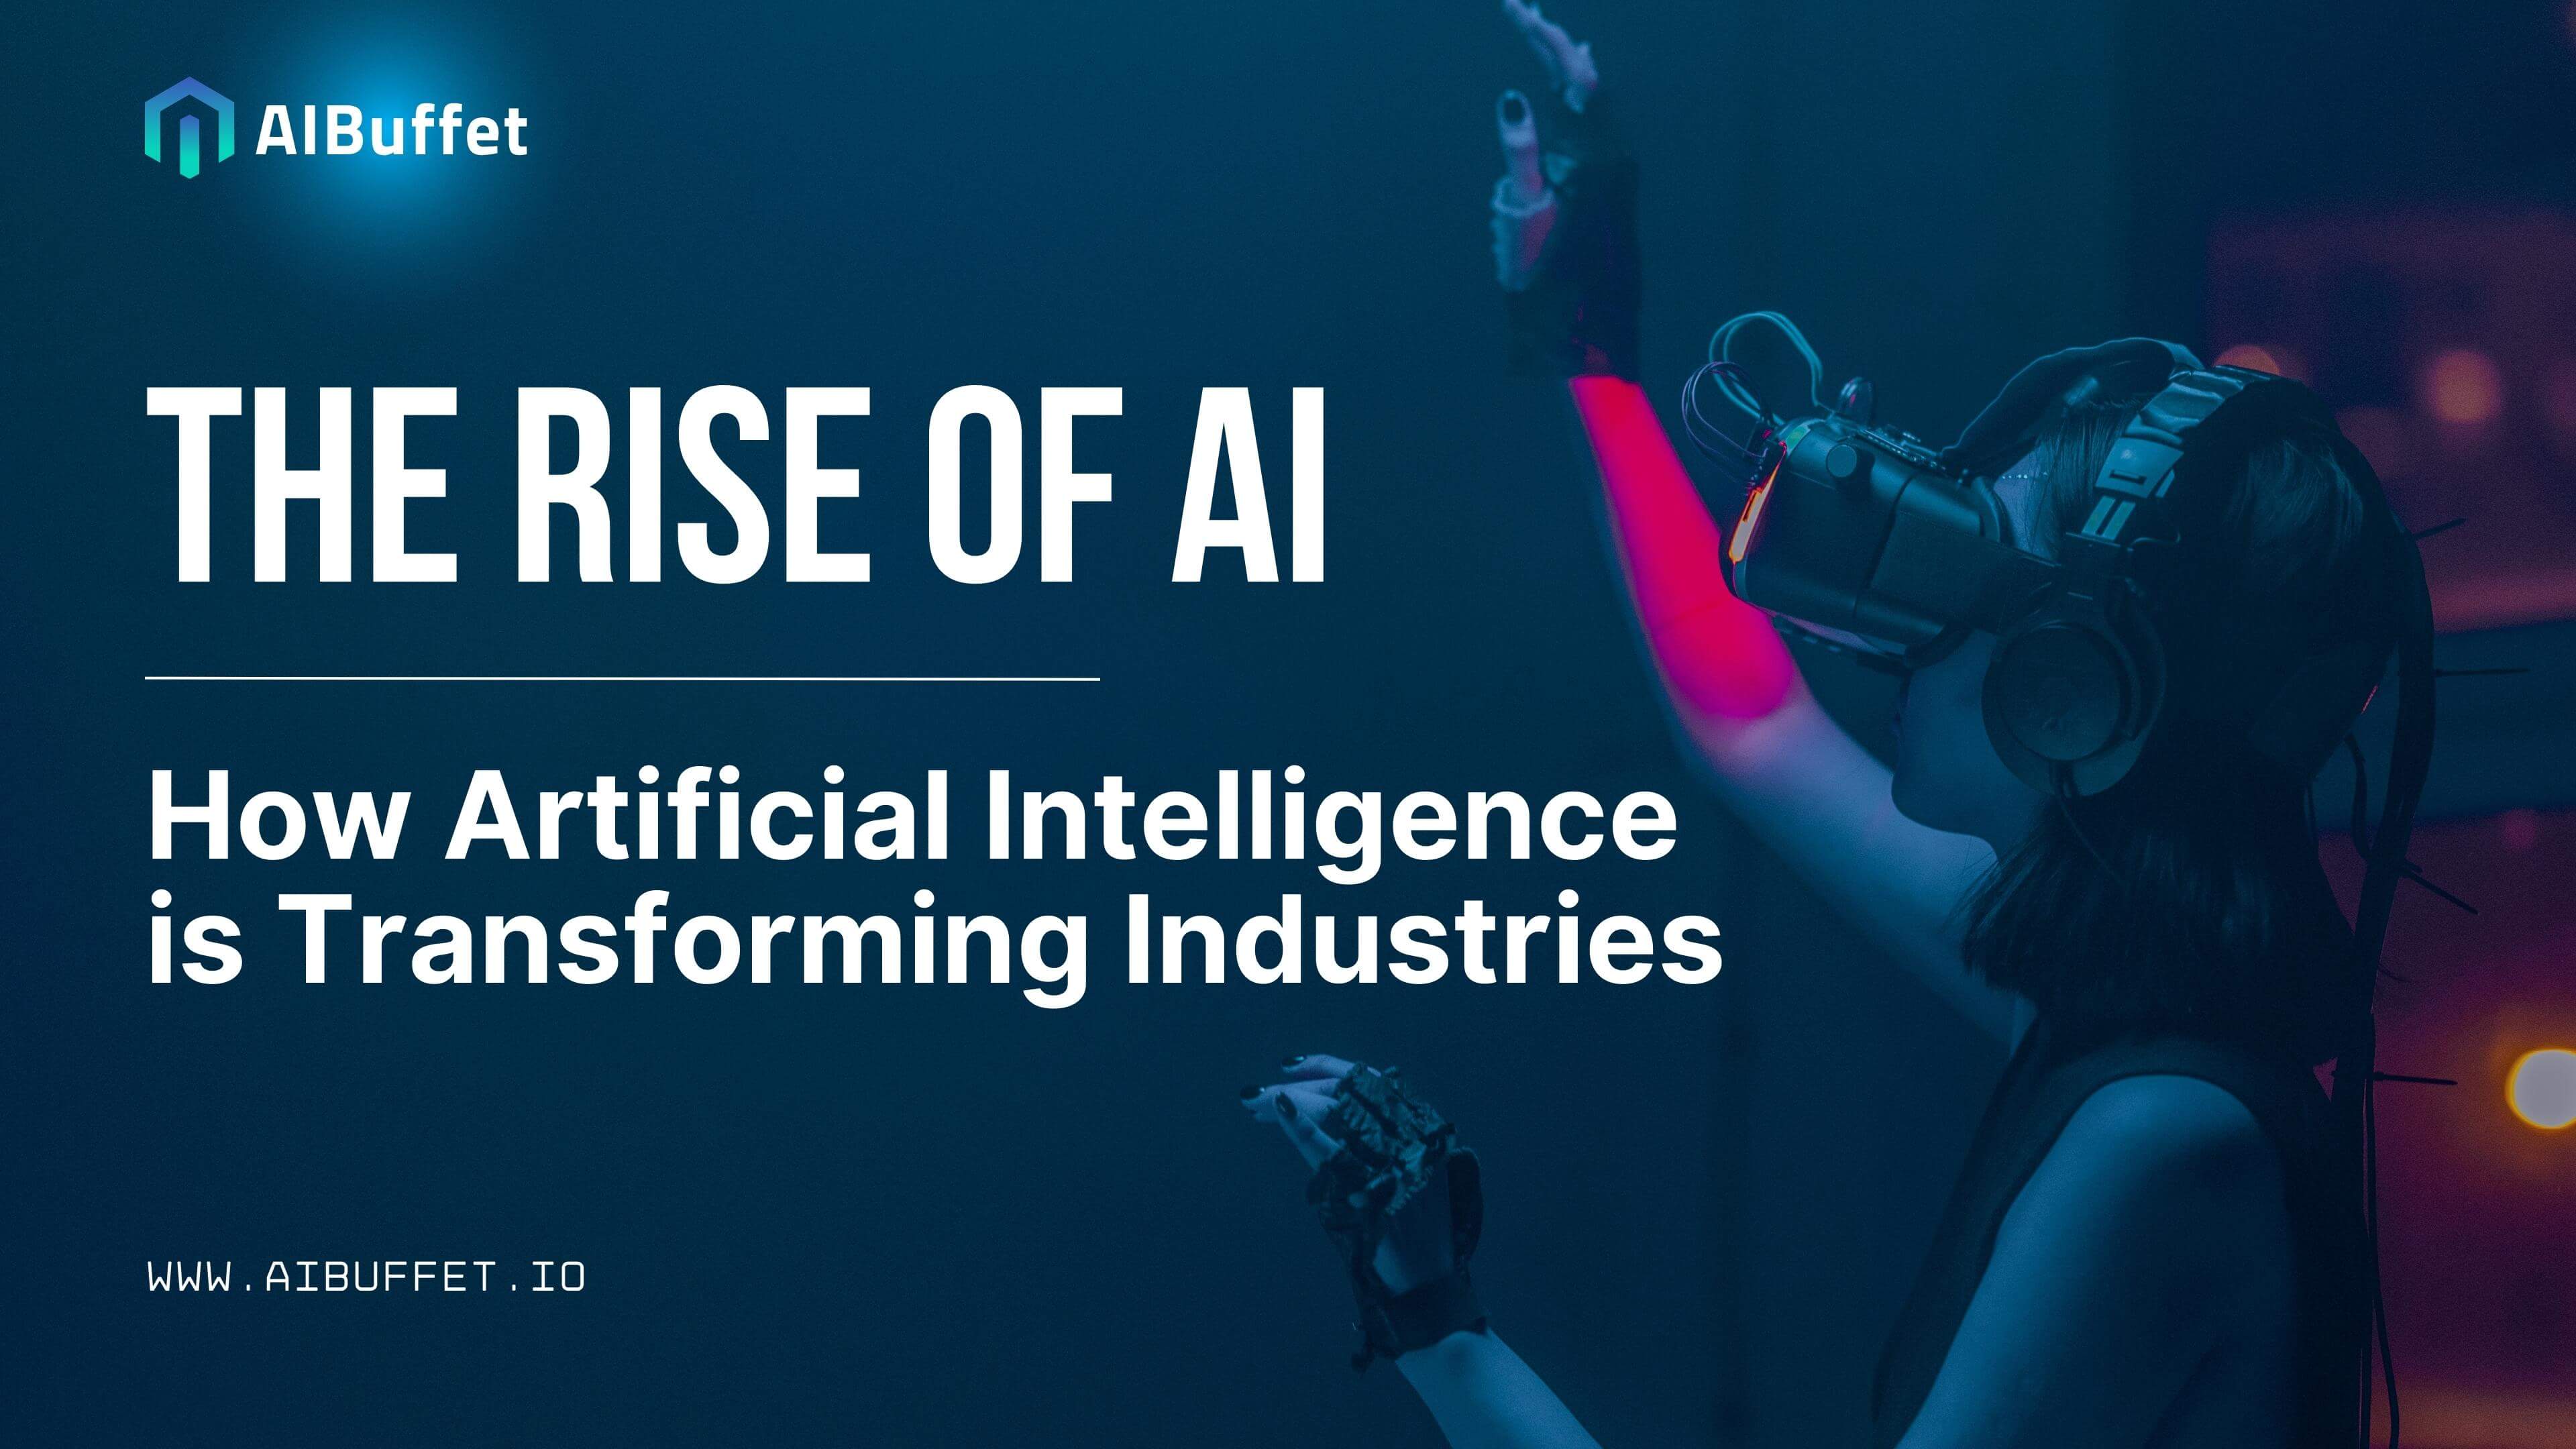 The Rise of AI: How Artificial Intelligence is Transforming Industries